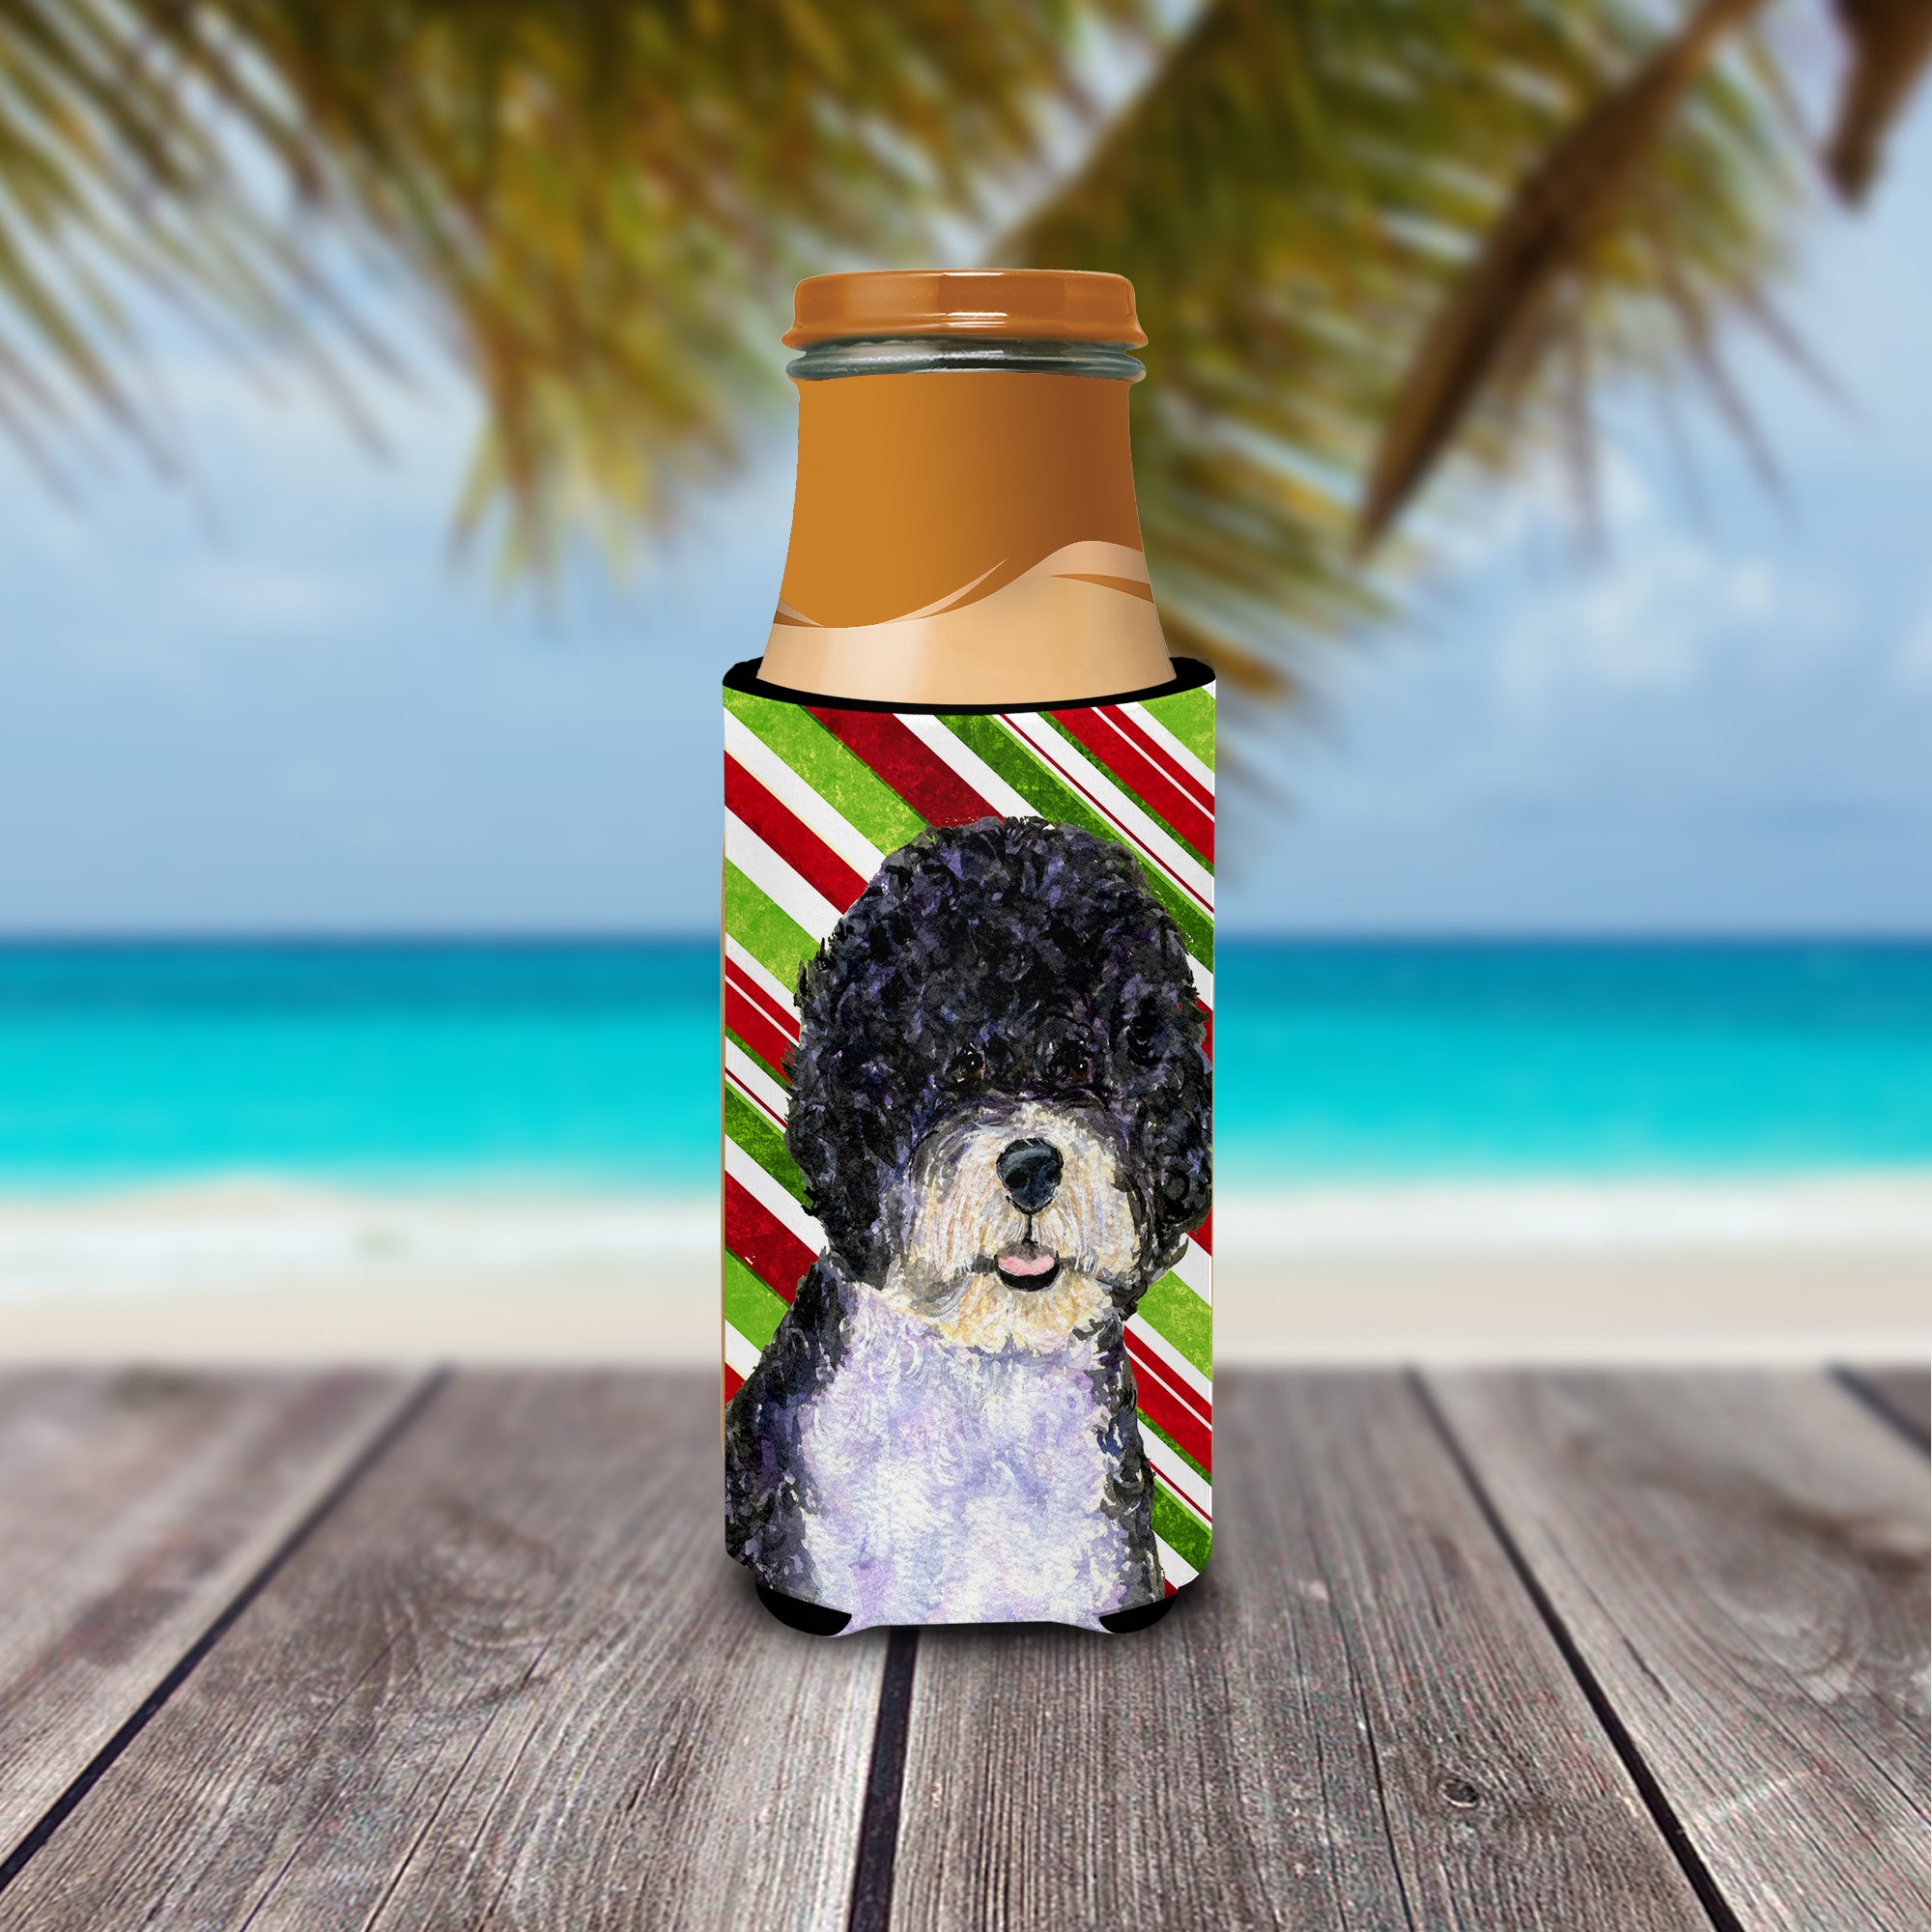 Portuguese Water Dog Candy Cane Holiday Christmas Ultra Beverage Insulators for slim cans SS4559MUK